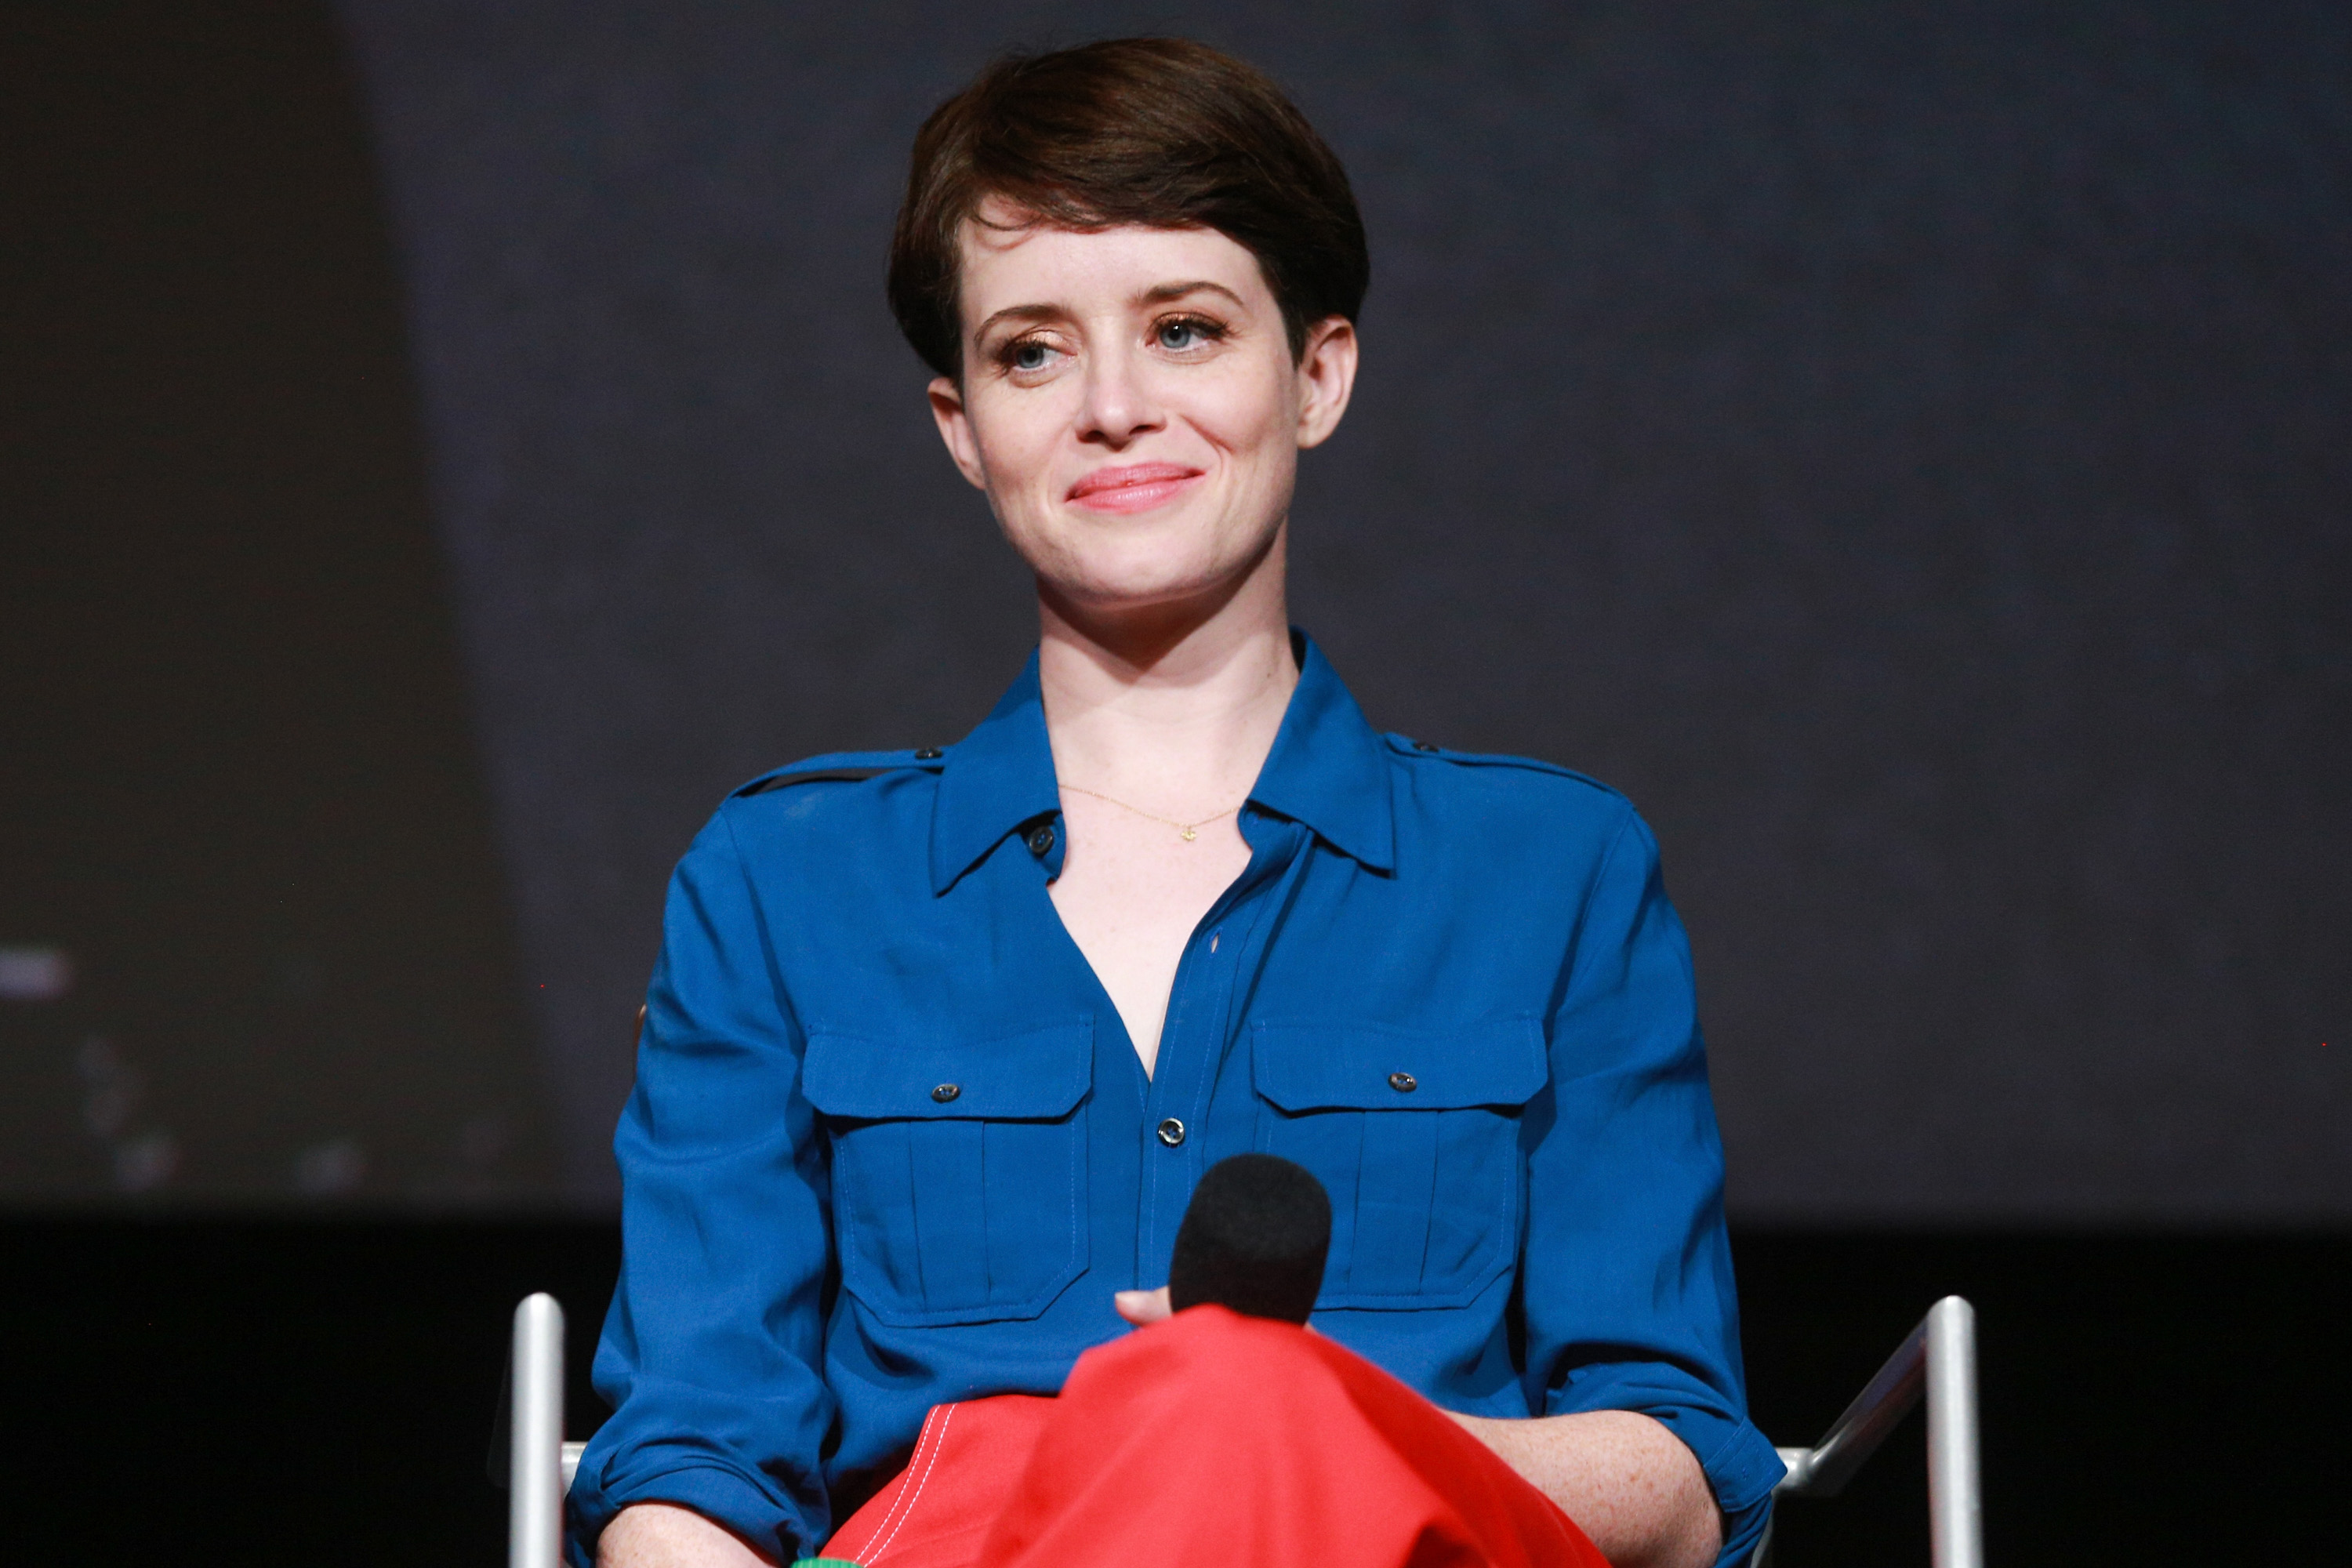 Claire Foy speaks onstage during the For Your Consideration event for Netflix's "The Crown" in North Hollywood, Calif. on April 27, 2018. (Rich Fury—Getty Images)